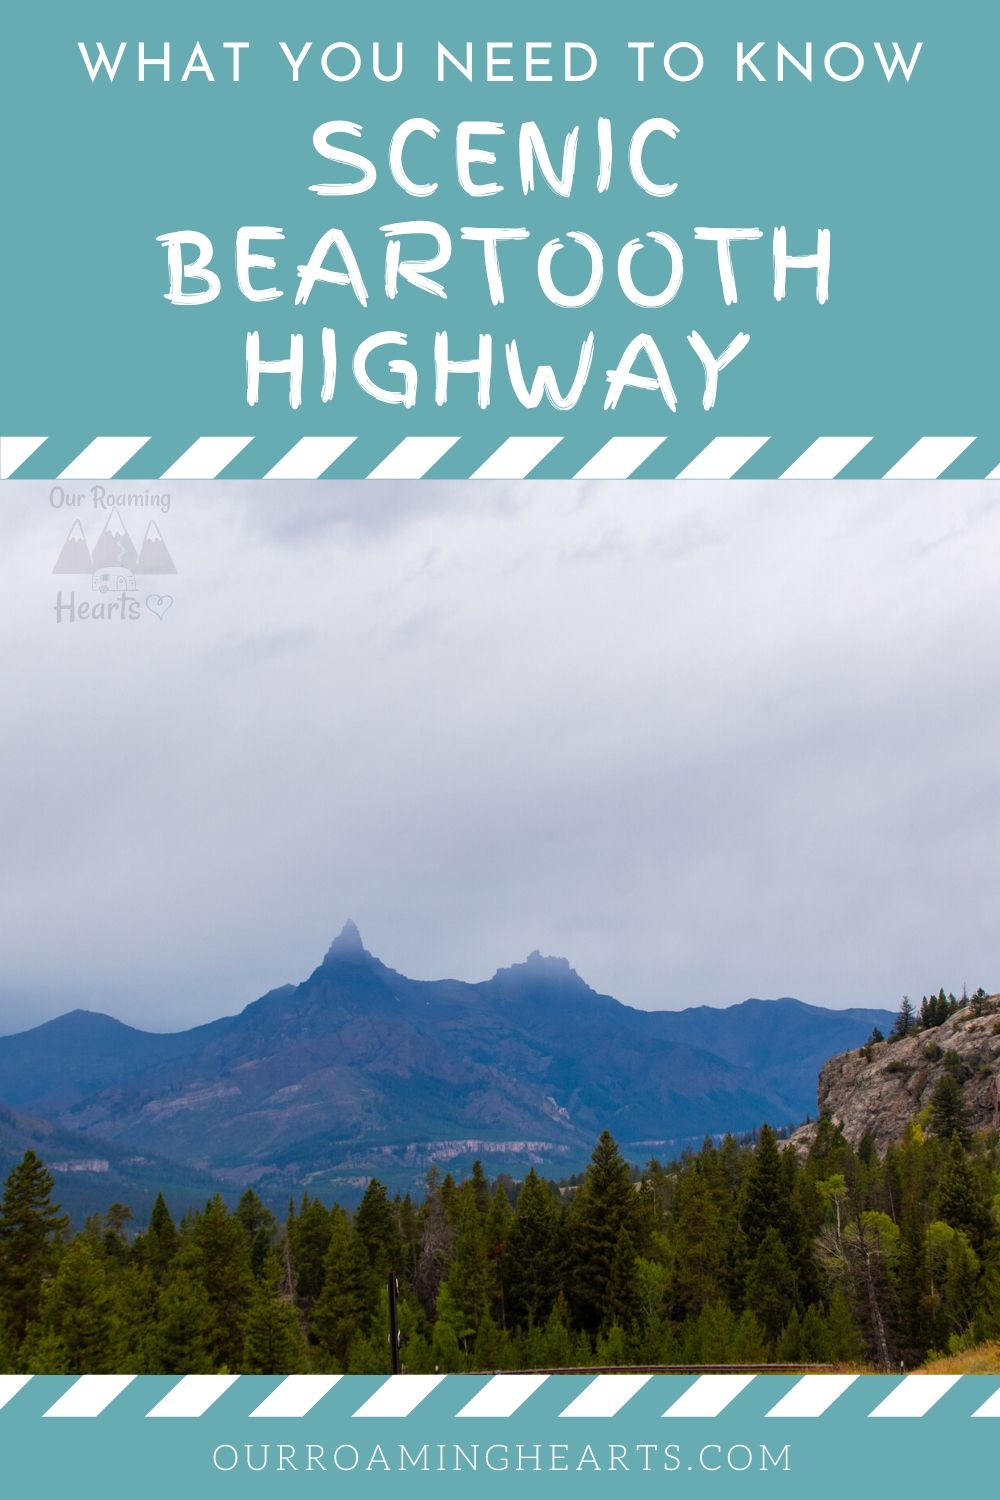 Beartooth Highway, a 68-mile byway through southwest Montana and into Yellowstone National Park. Here’s a glance at some of the things to not miss. #ourroaminghearts #scenicbyway #beartoothhighway #wyoming #montana #nationalpark | National Park | Beartooth Highway | Scenic Drives | Wyoming | Montana |